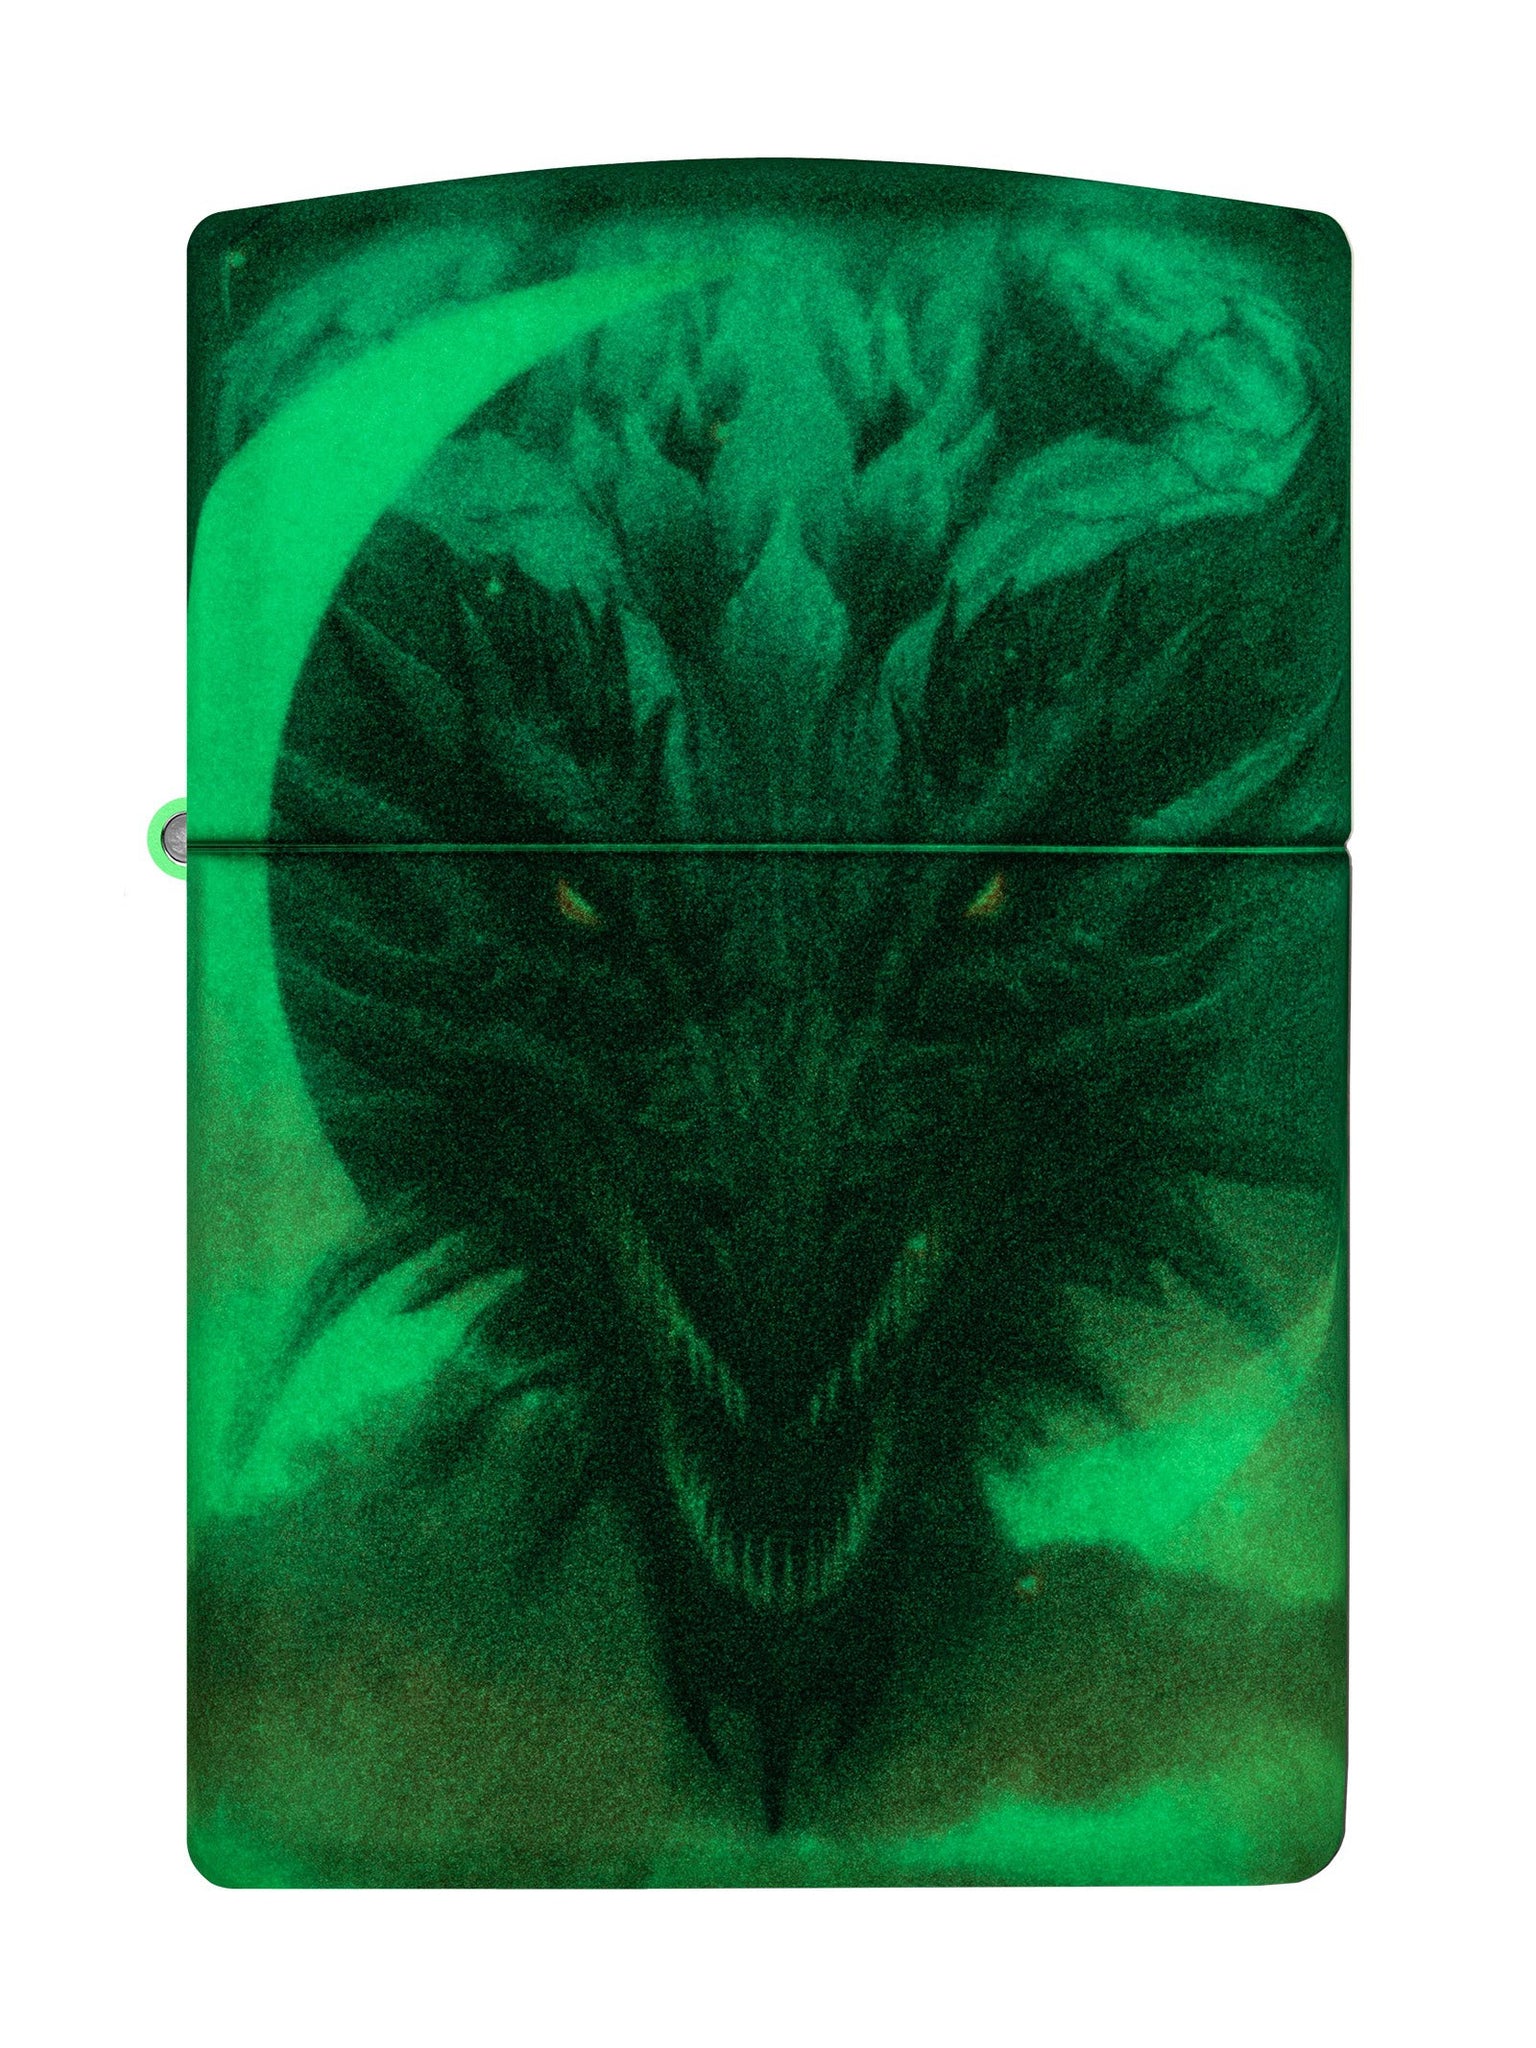 Zippo Lighter: Dragon with Moon - Glow-in-the-Dark Green 48934